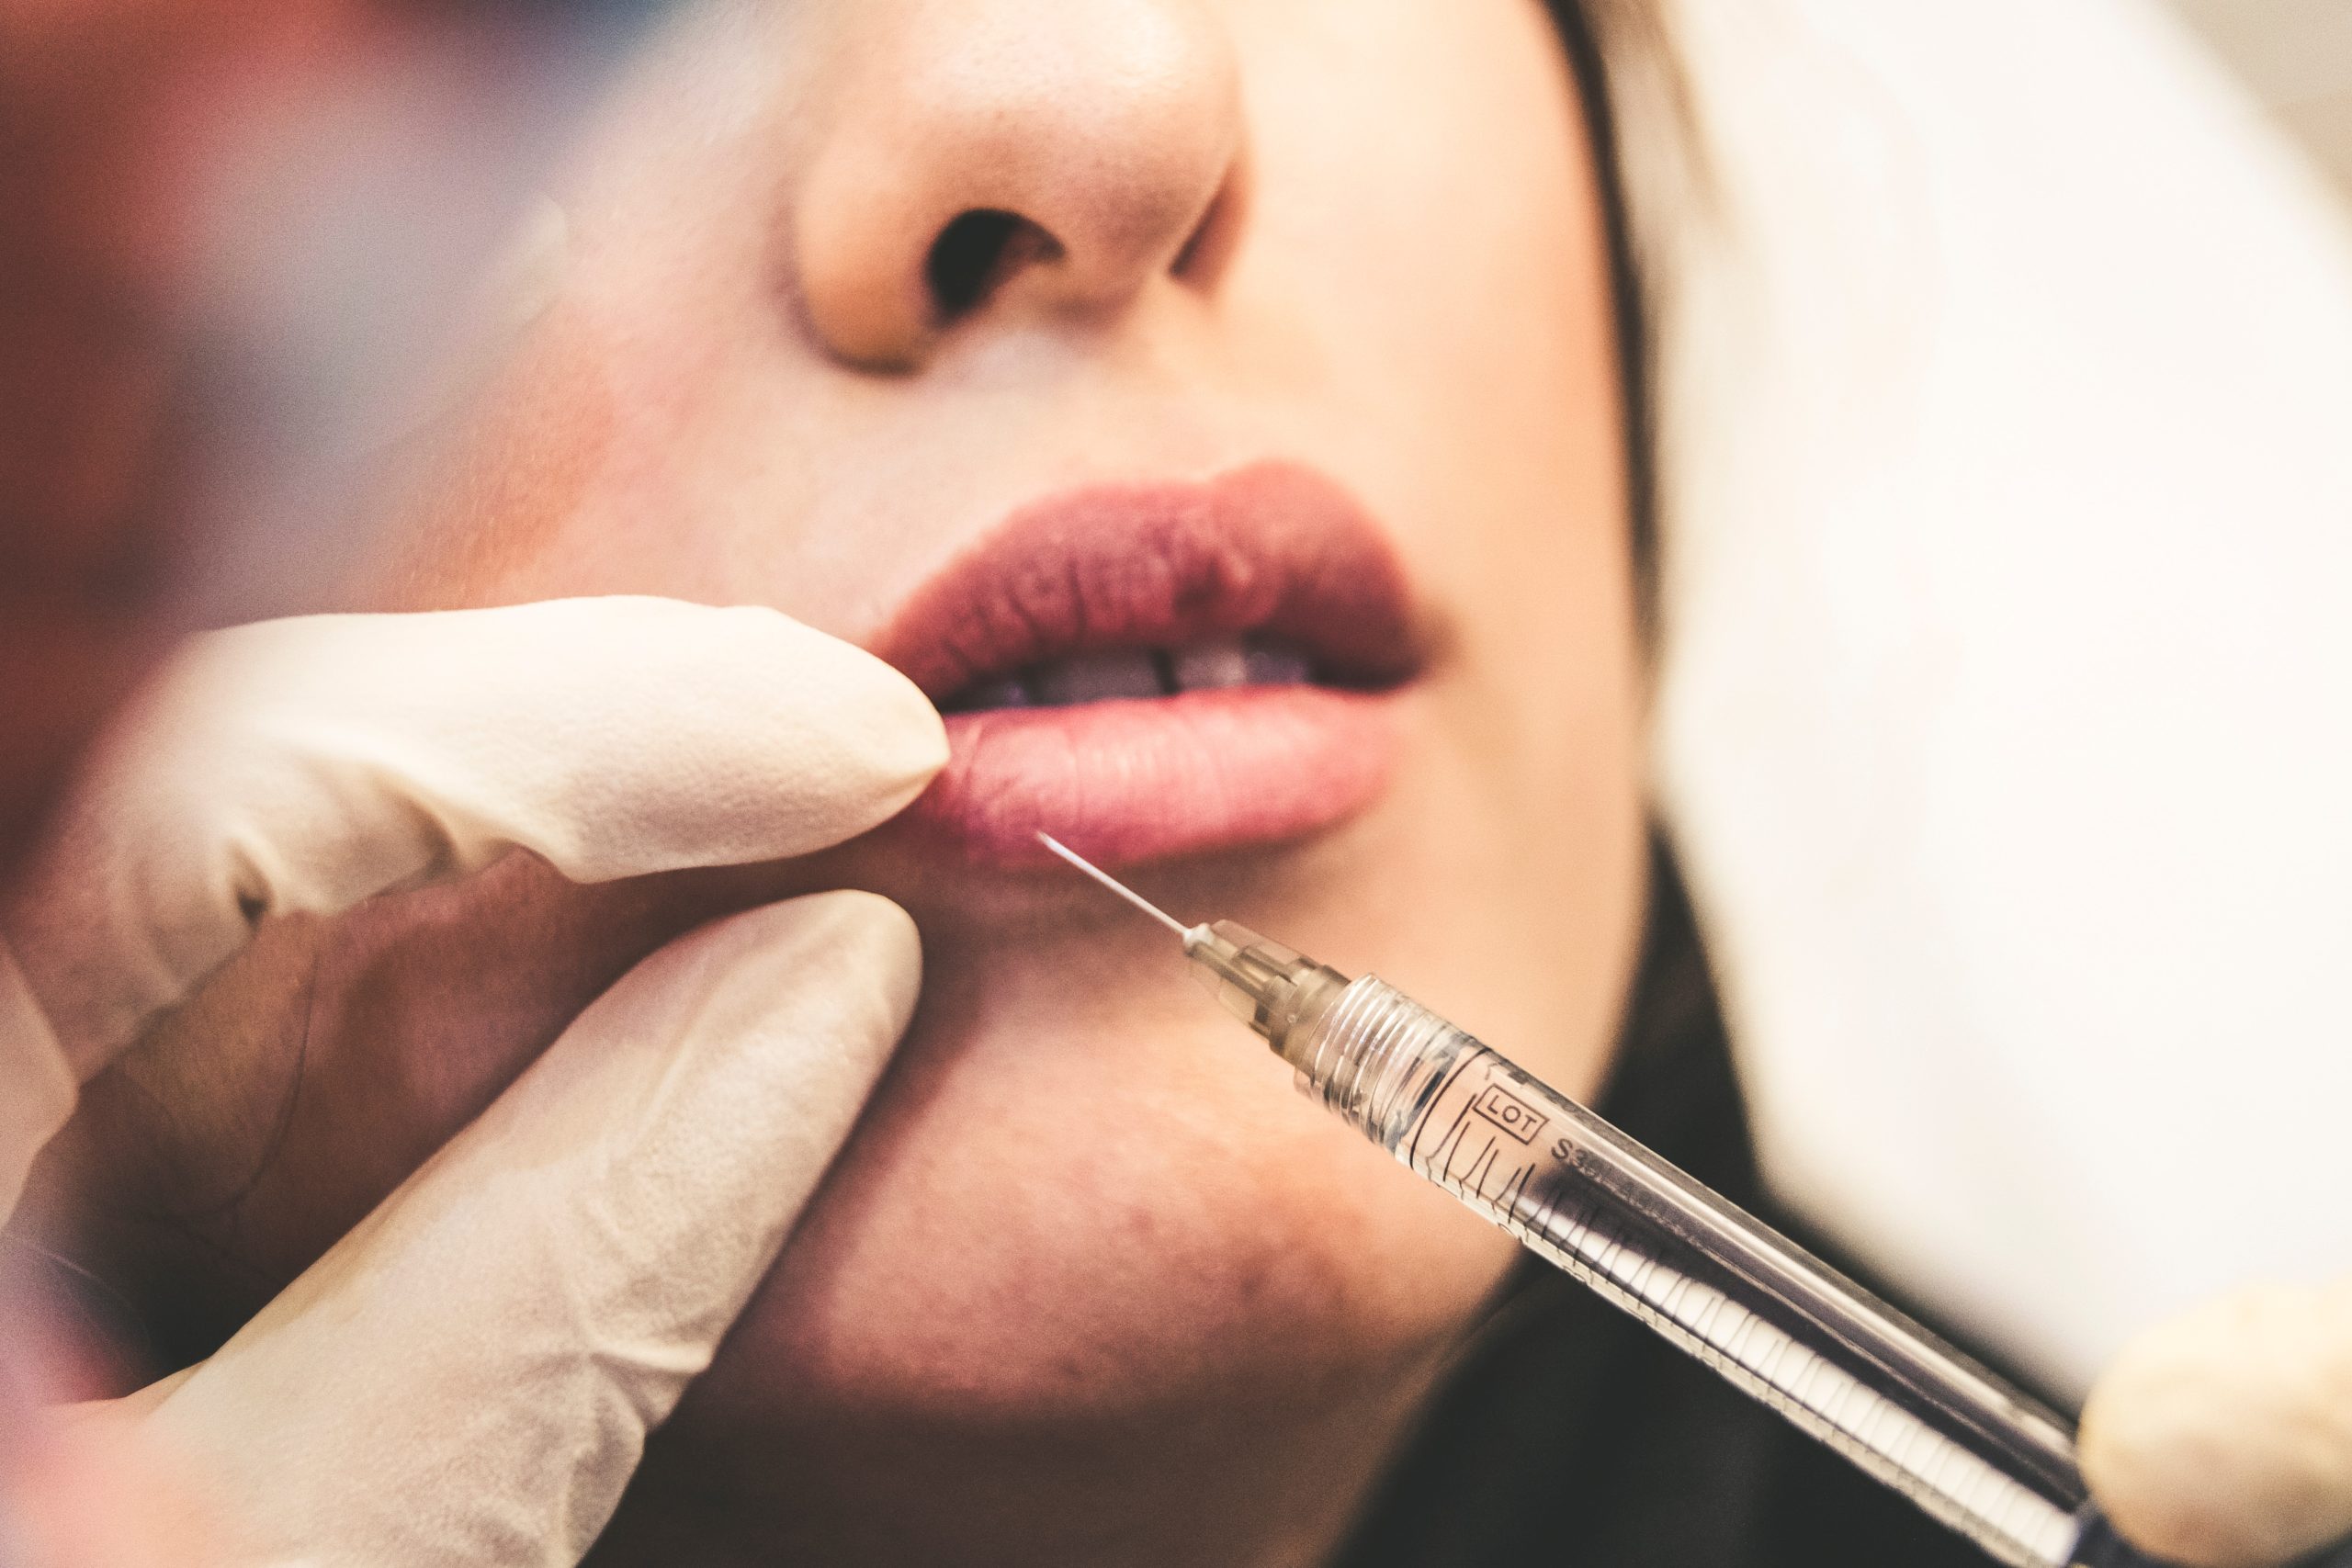 What to know about cosmetic injections